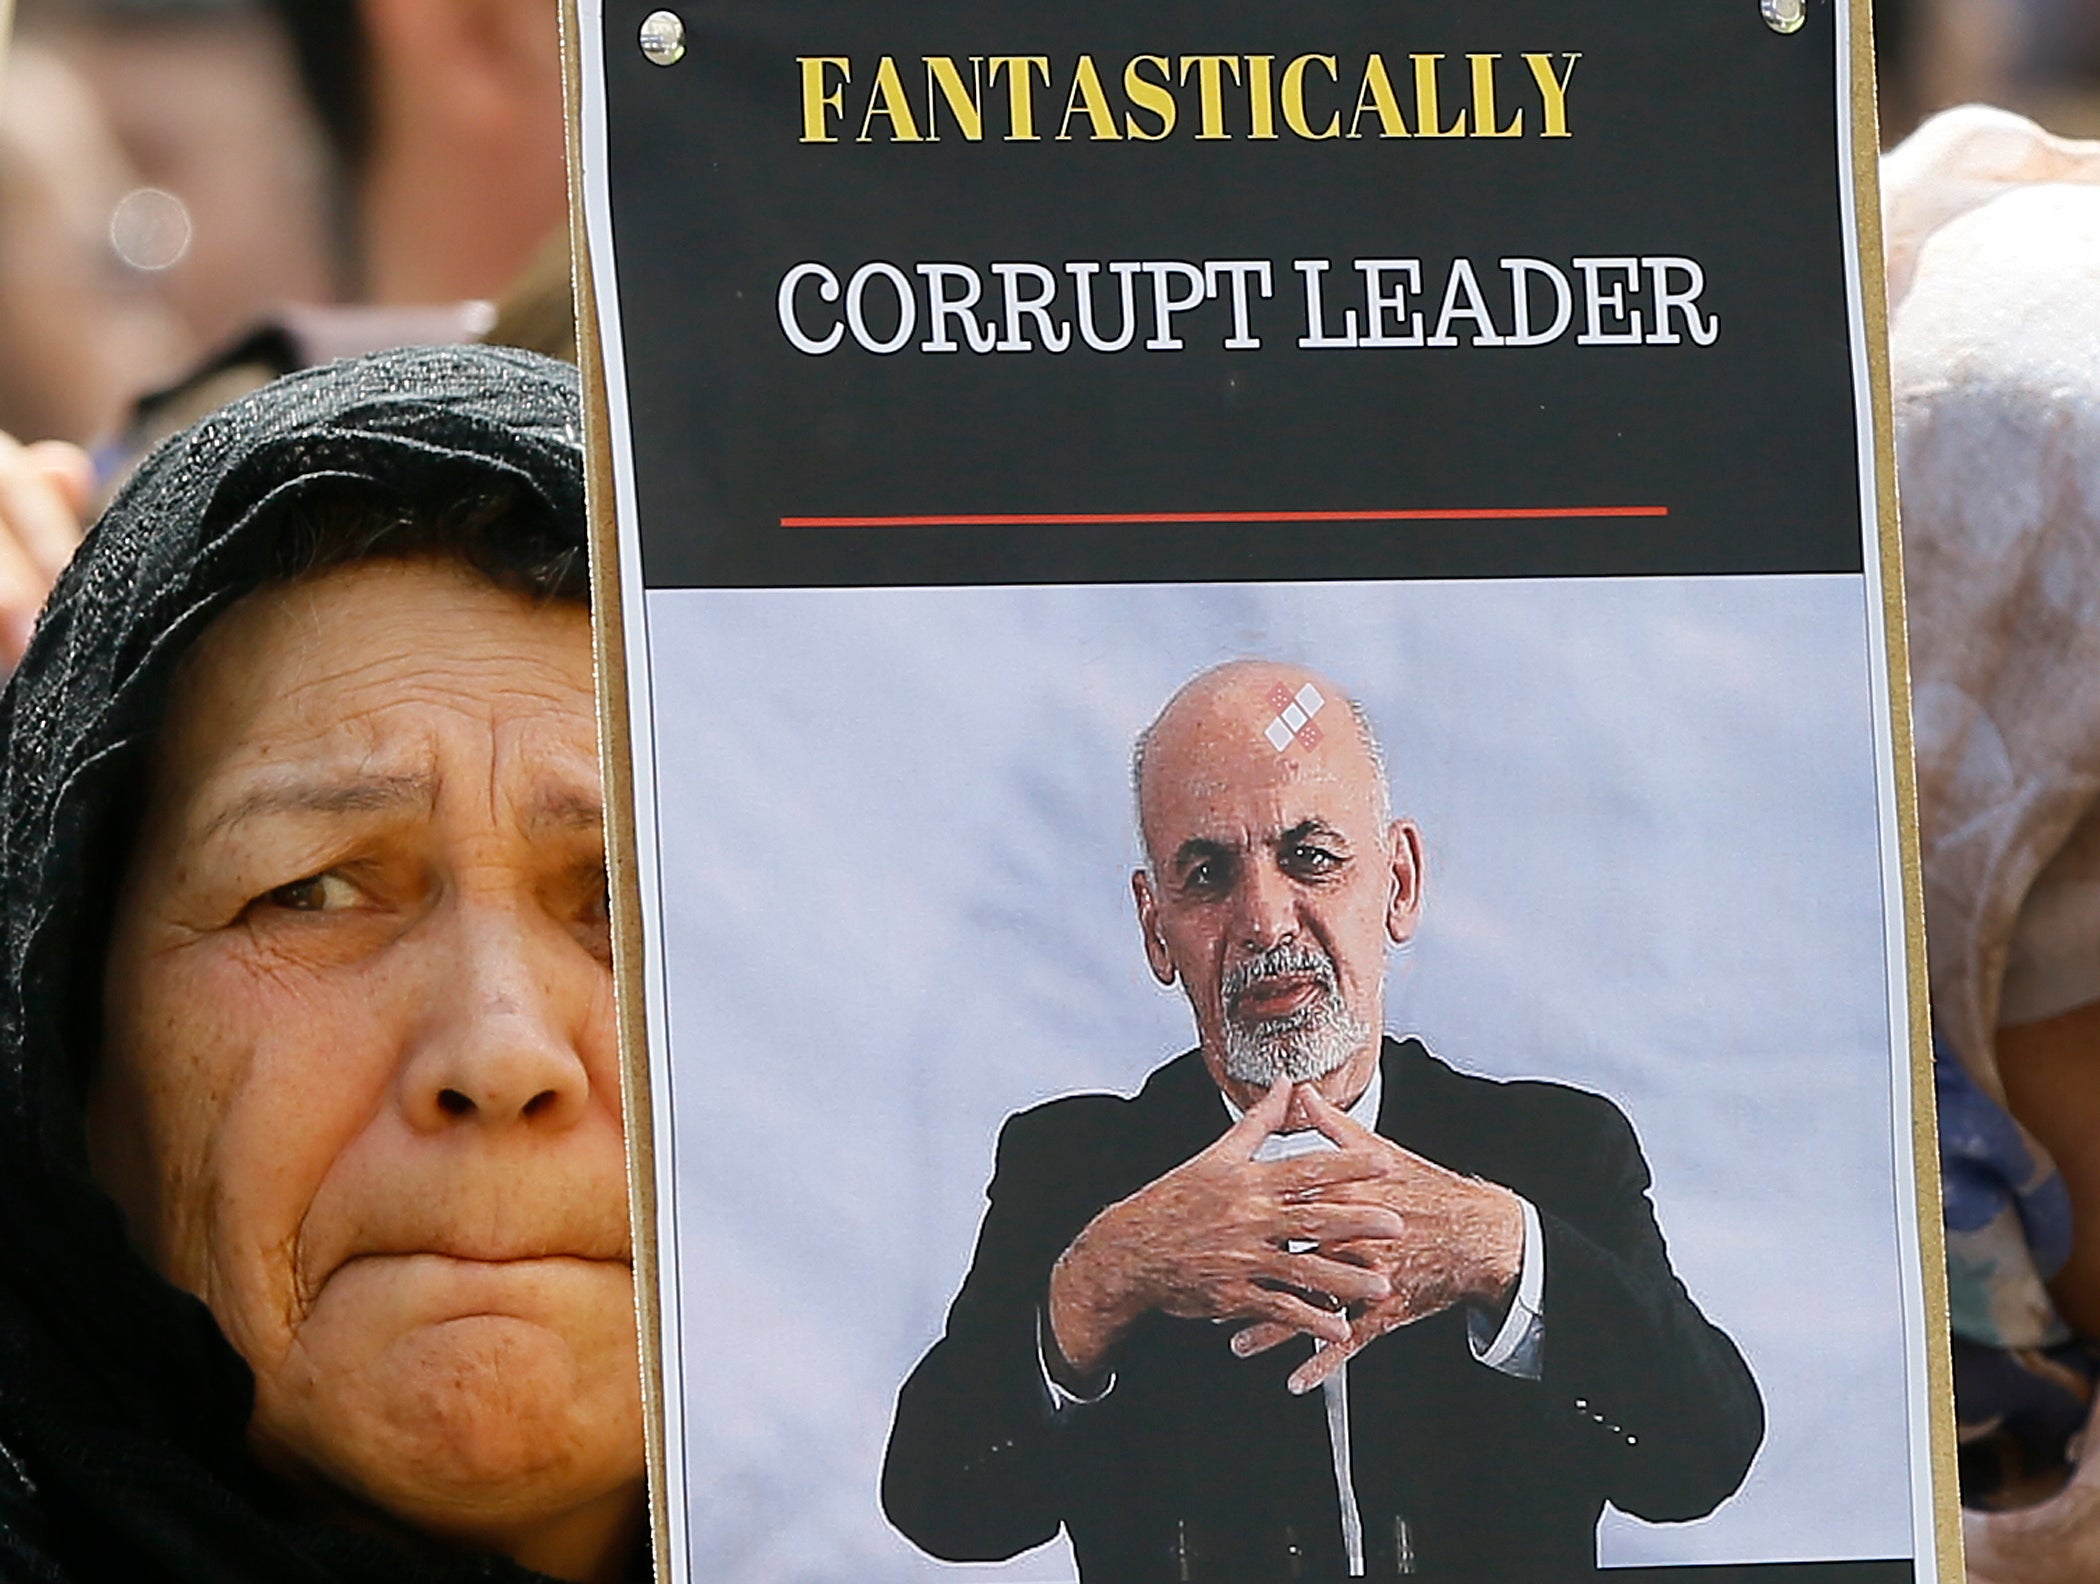 File: A woman holds a banner showing exiled Afghanistan president Ashraf Ghani during a protest outside the Anti-Corruption Summit in London